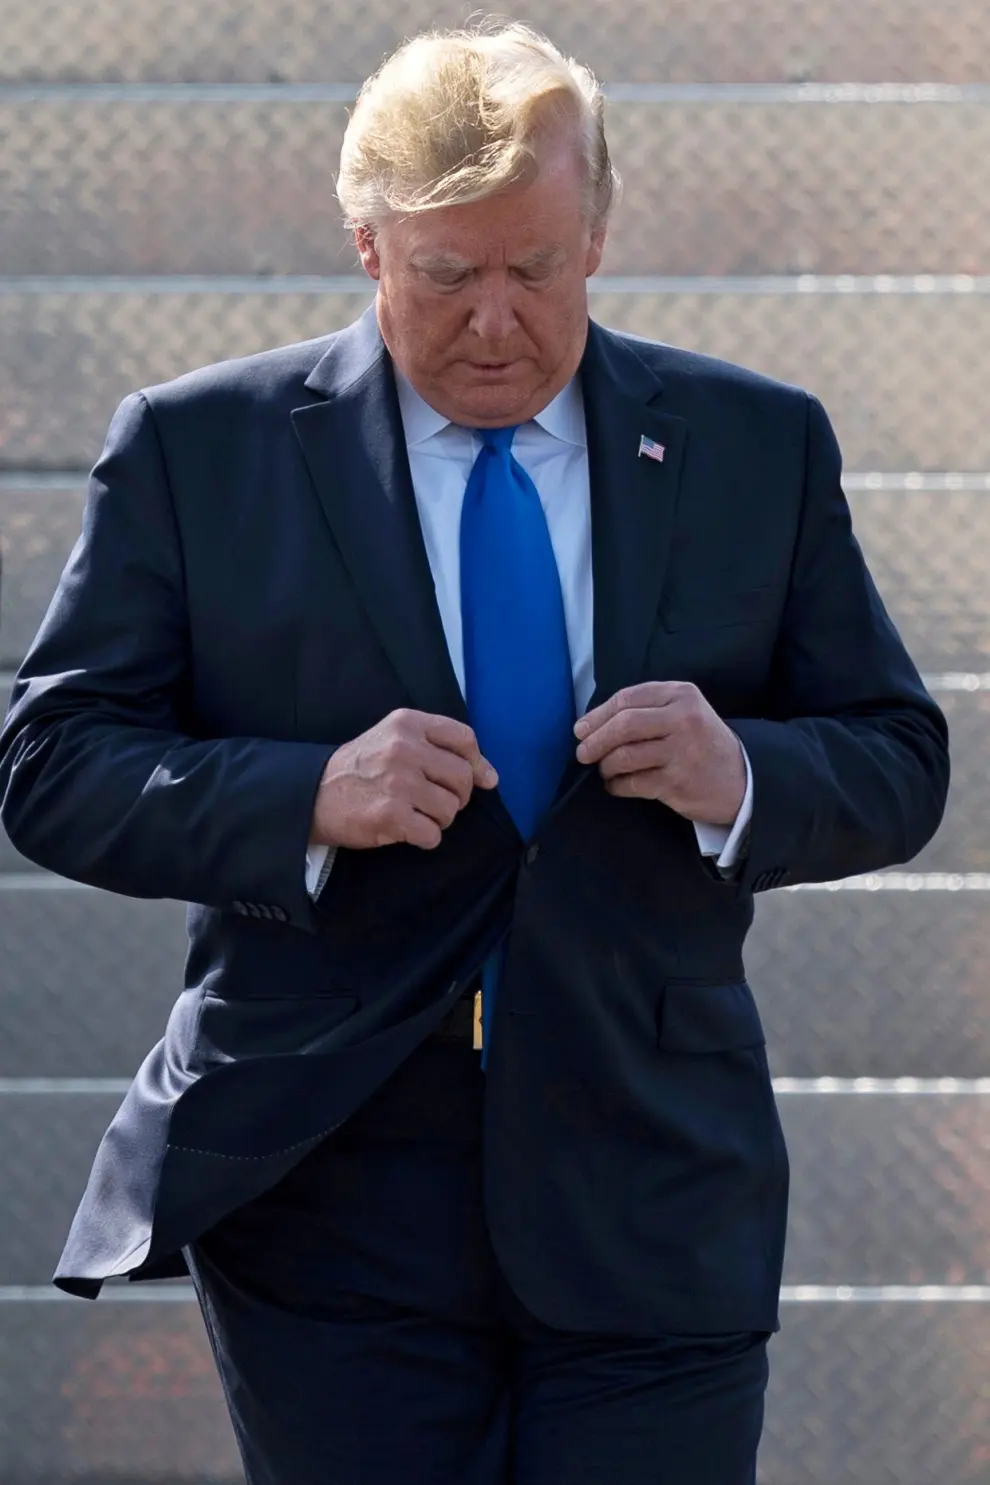 Security is seen during U.S. President Donald Trump's state visit to Britain, at Stansted Airport near London, Britain, June 3, 2019. REUTERS/Carlos Barria [[[REUTERS VOCENTO]]]